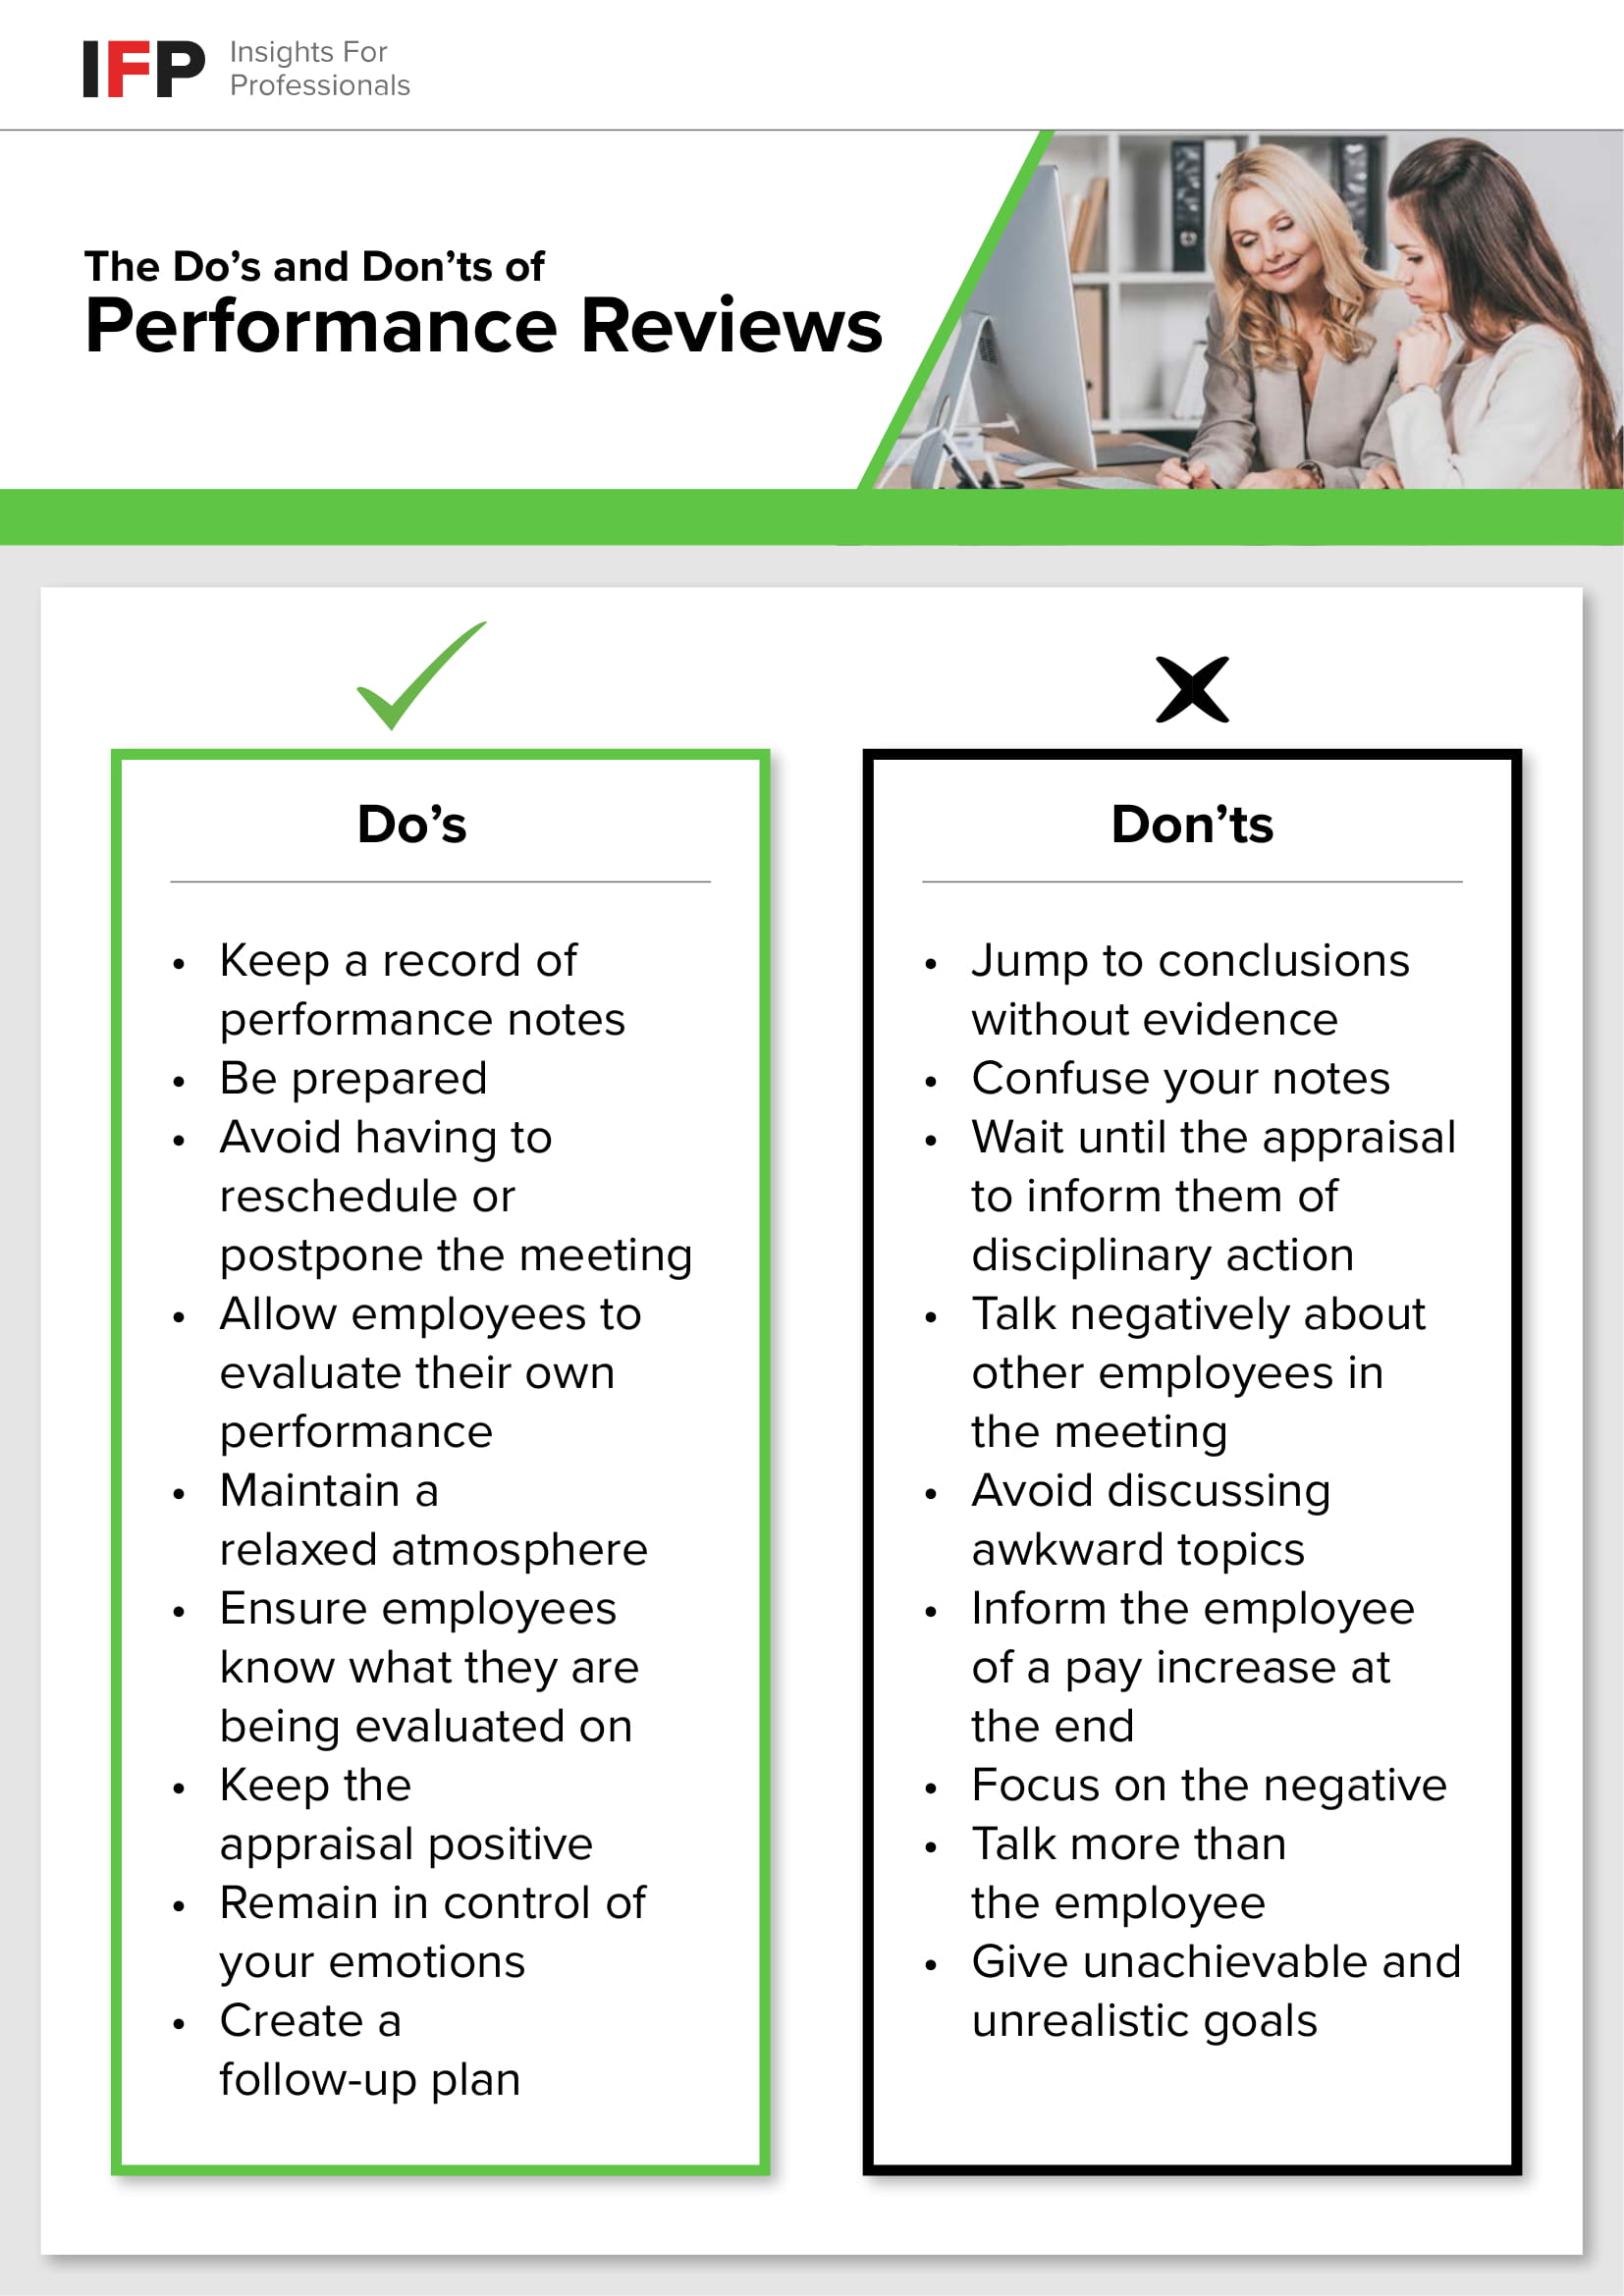 The Do’s and Don’ts of Performance Reviews [Infographic]